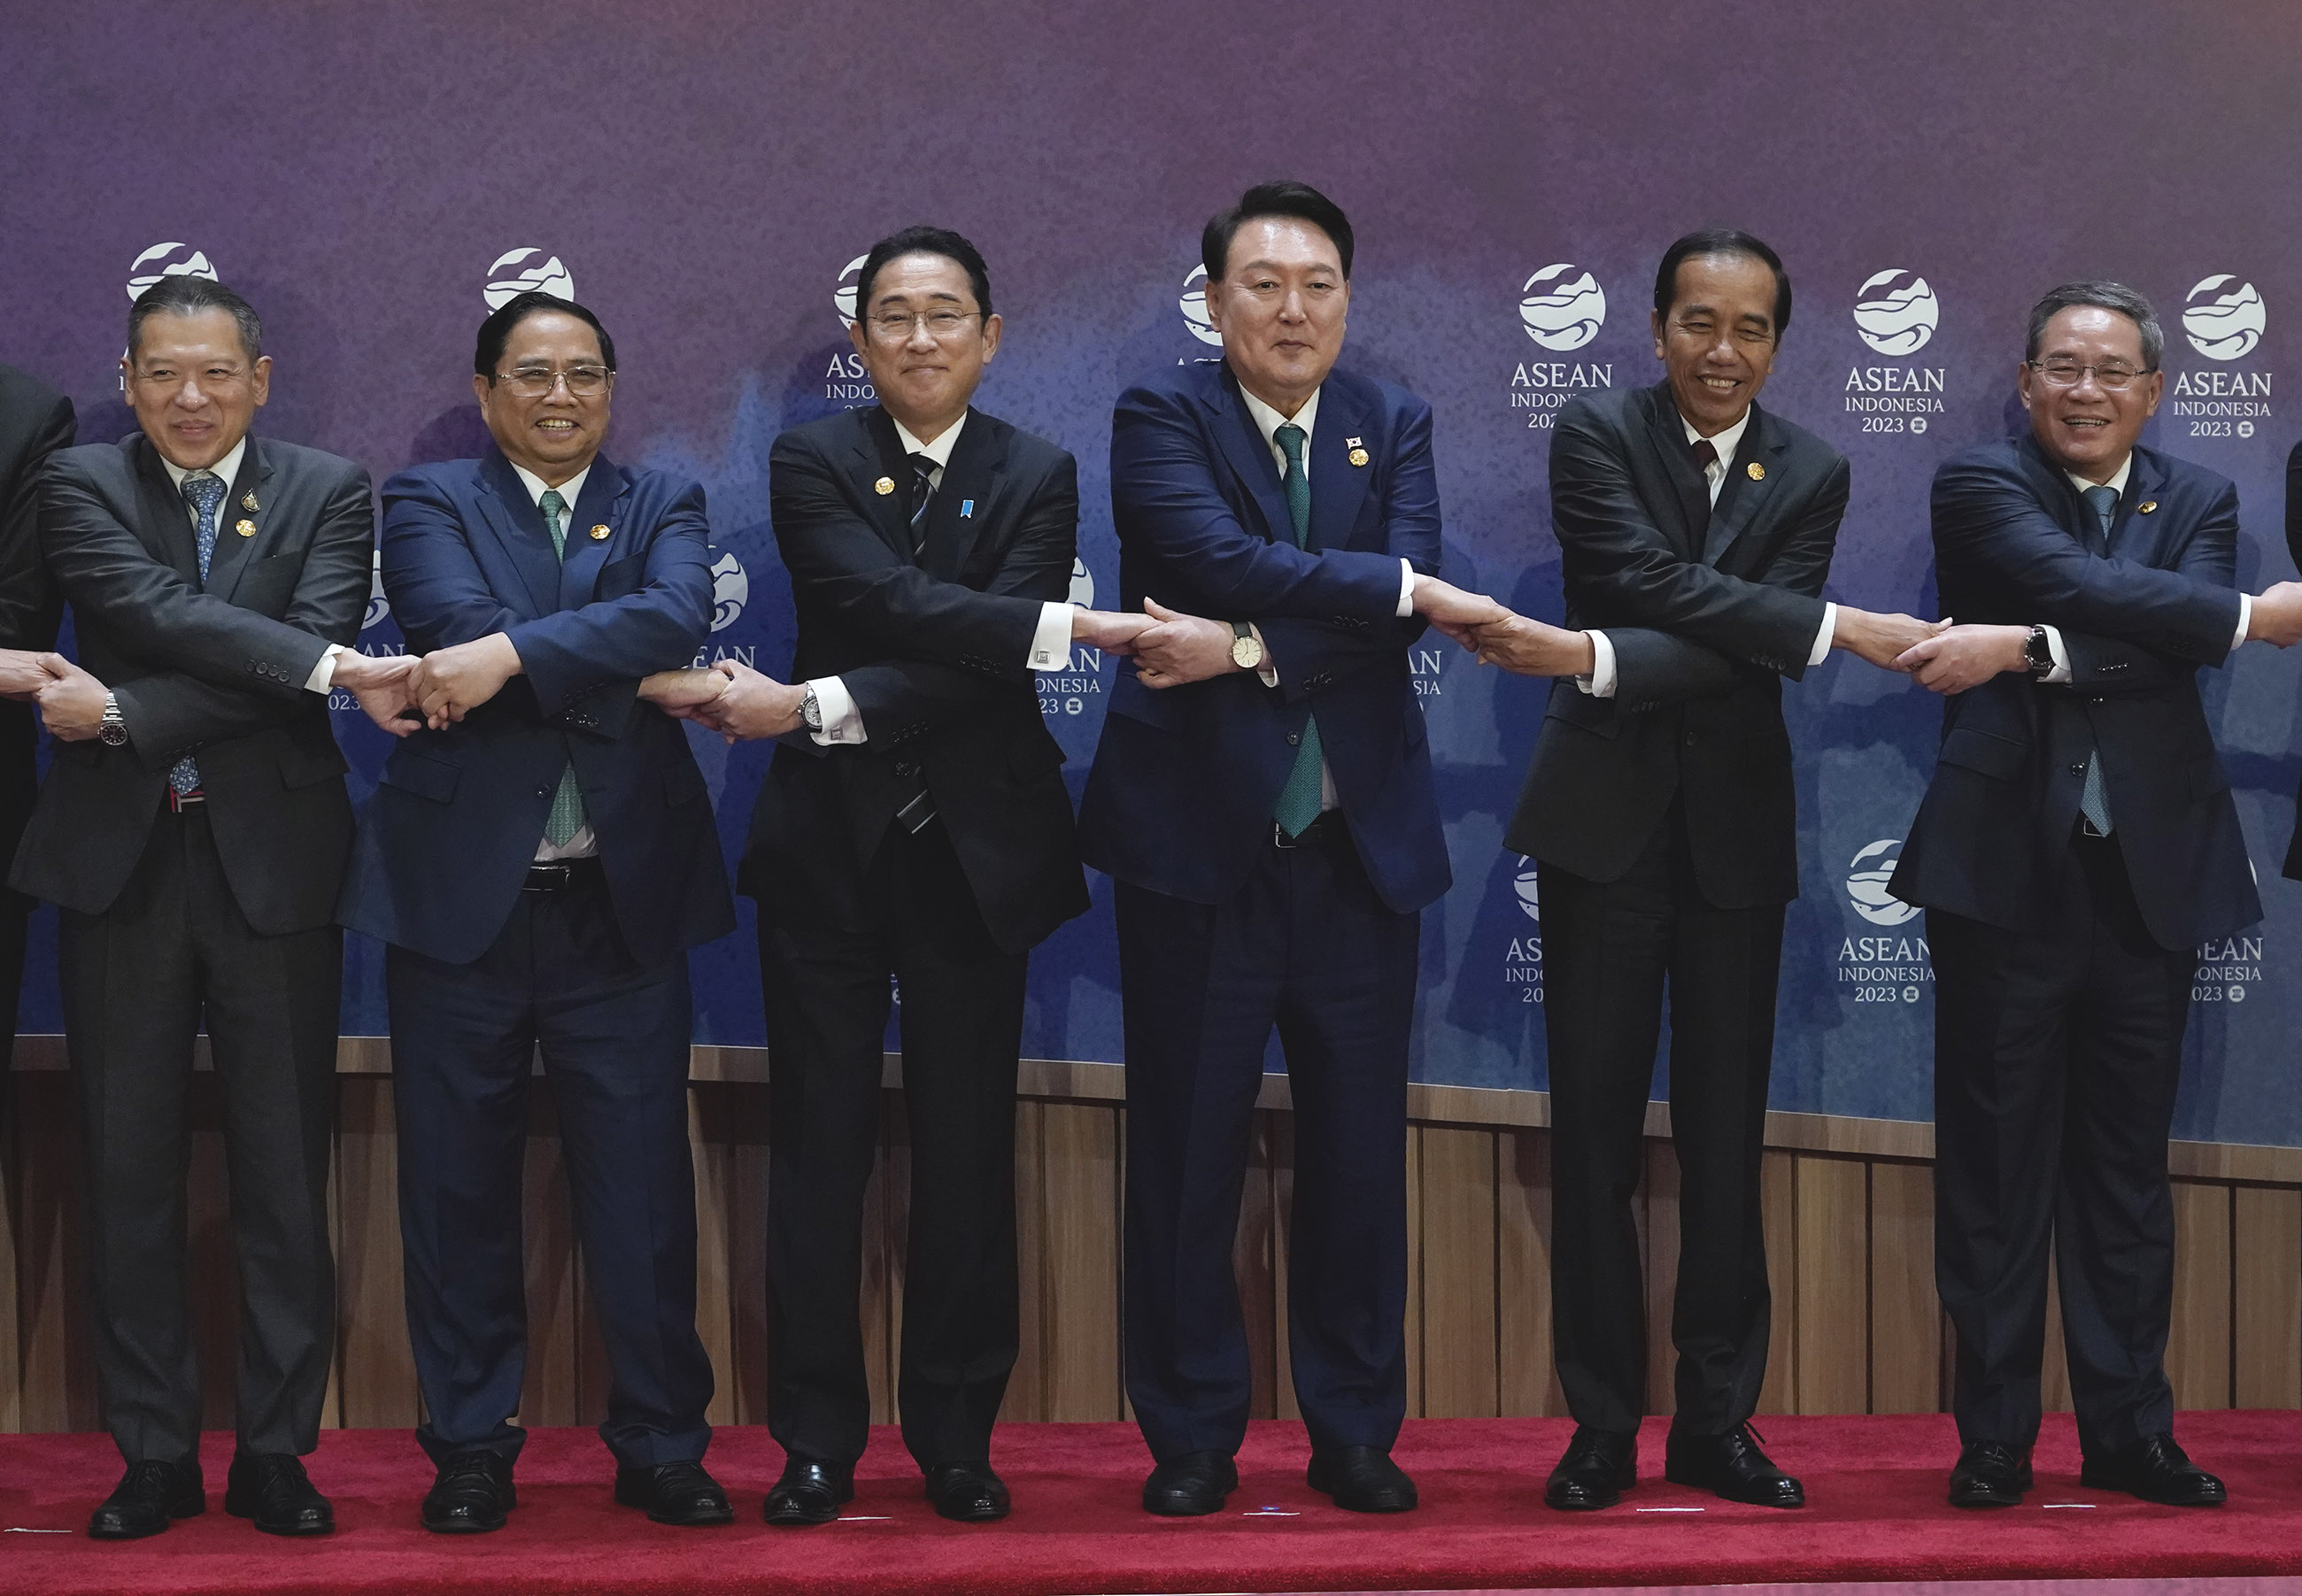 Photo session with ASEAN Plus Three leaders (2)